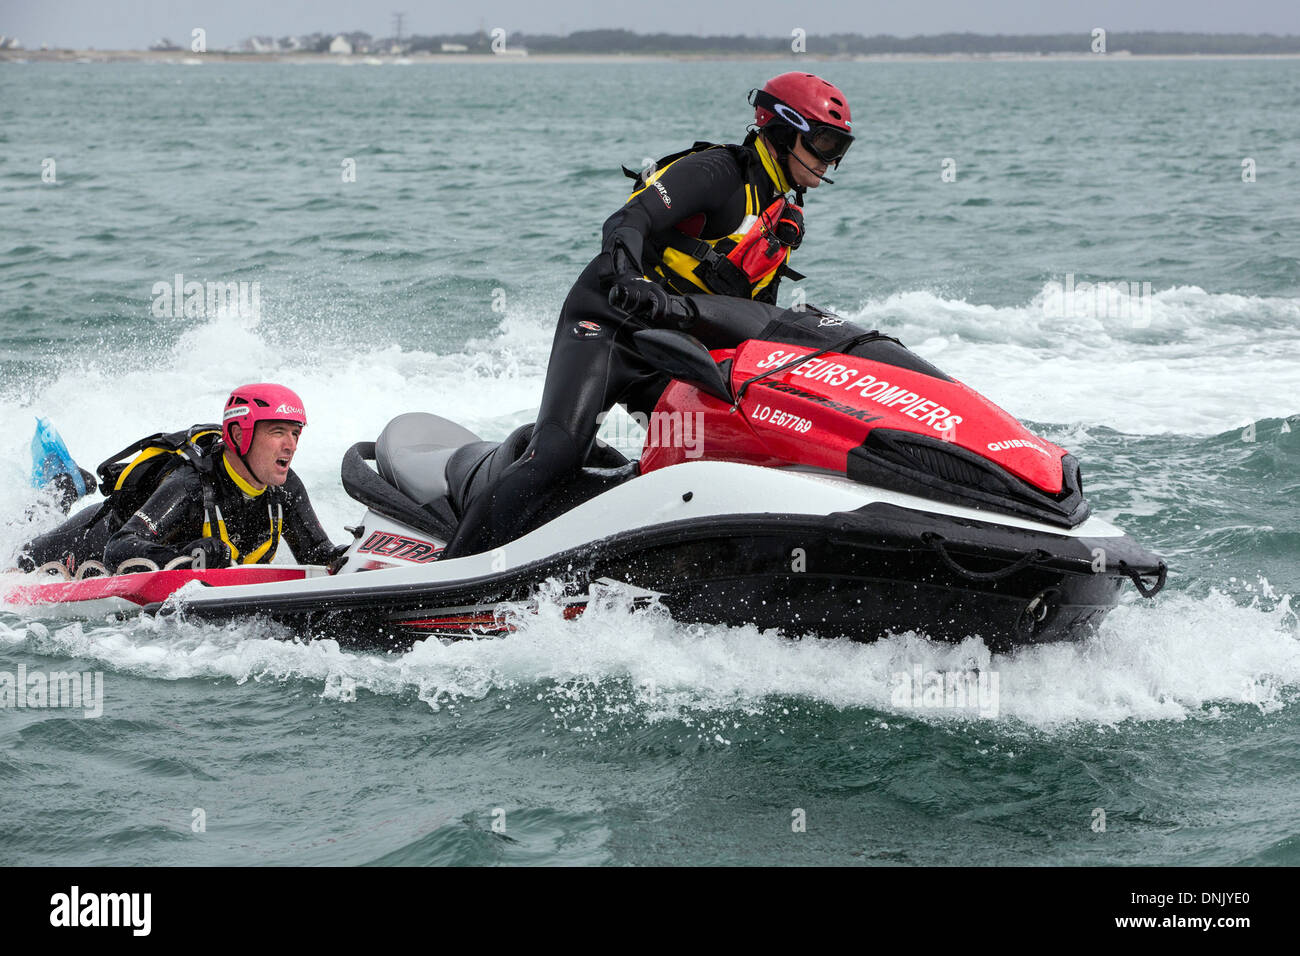 FIREFIGHTERS FROM THE SDIS 56 ON JET-SKIS, RAPID SEA RESCUE OPERATION, QUIBERON PENINSULA, MORBIHAN (56), FRANCE Stock Photo